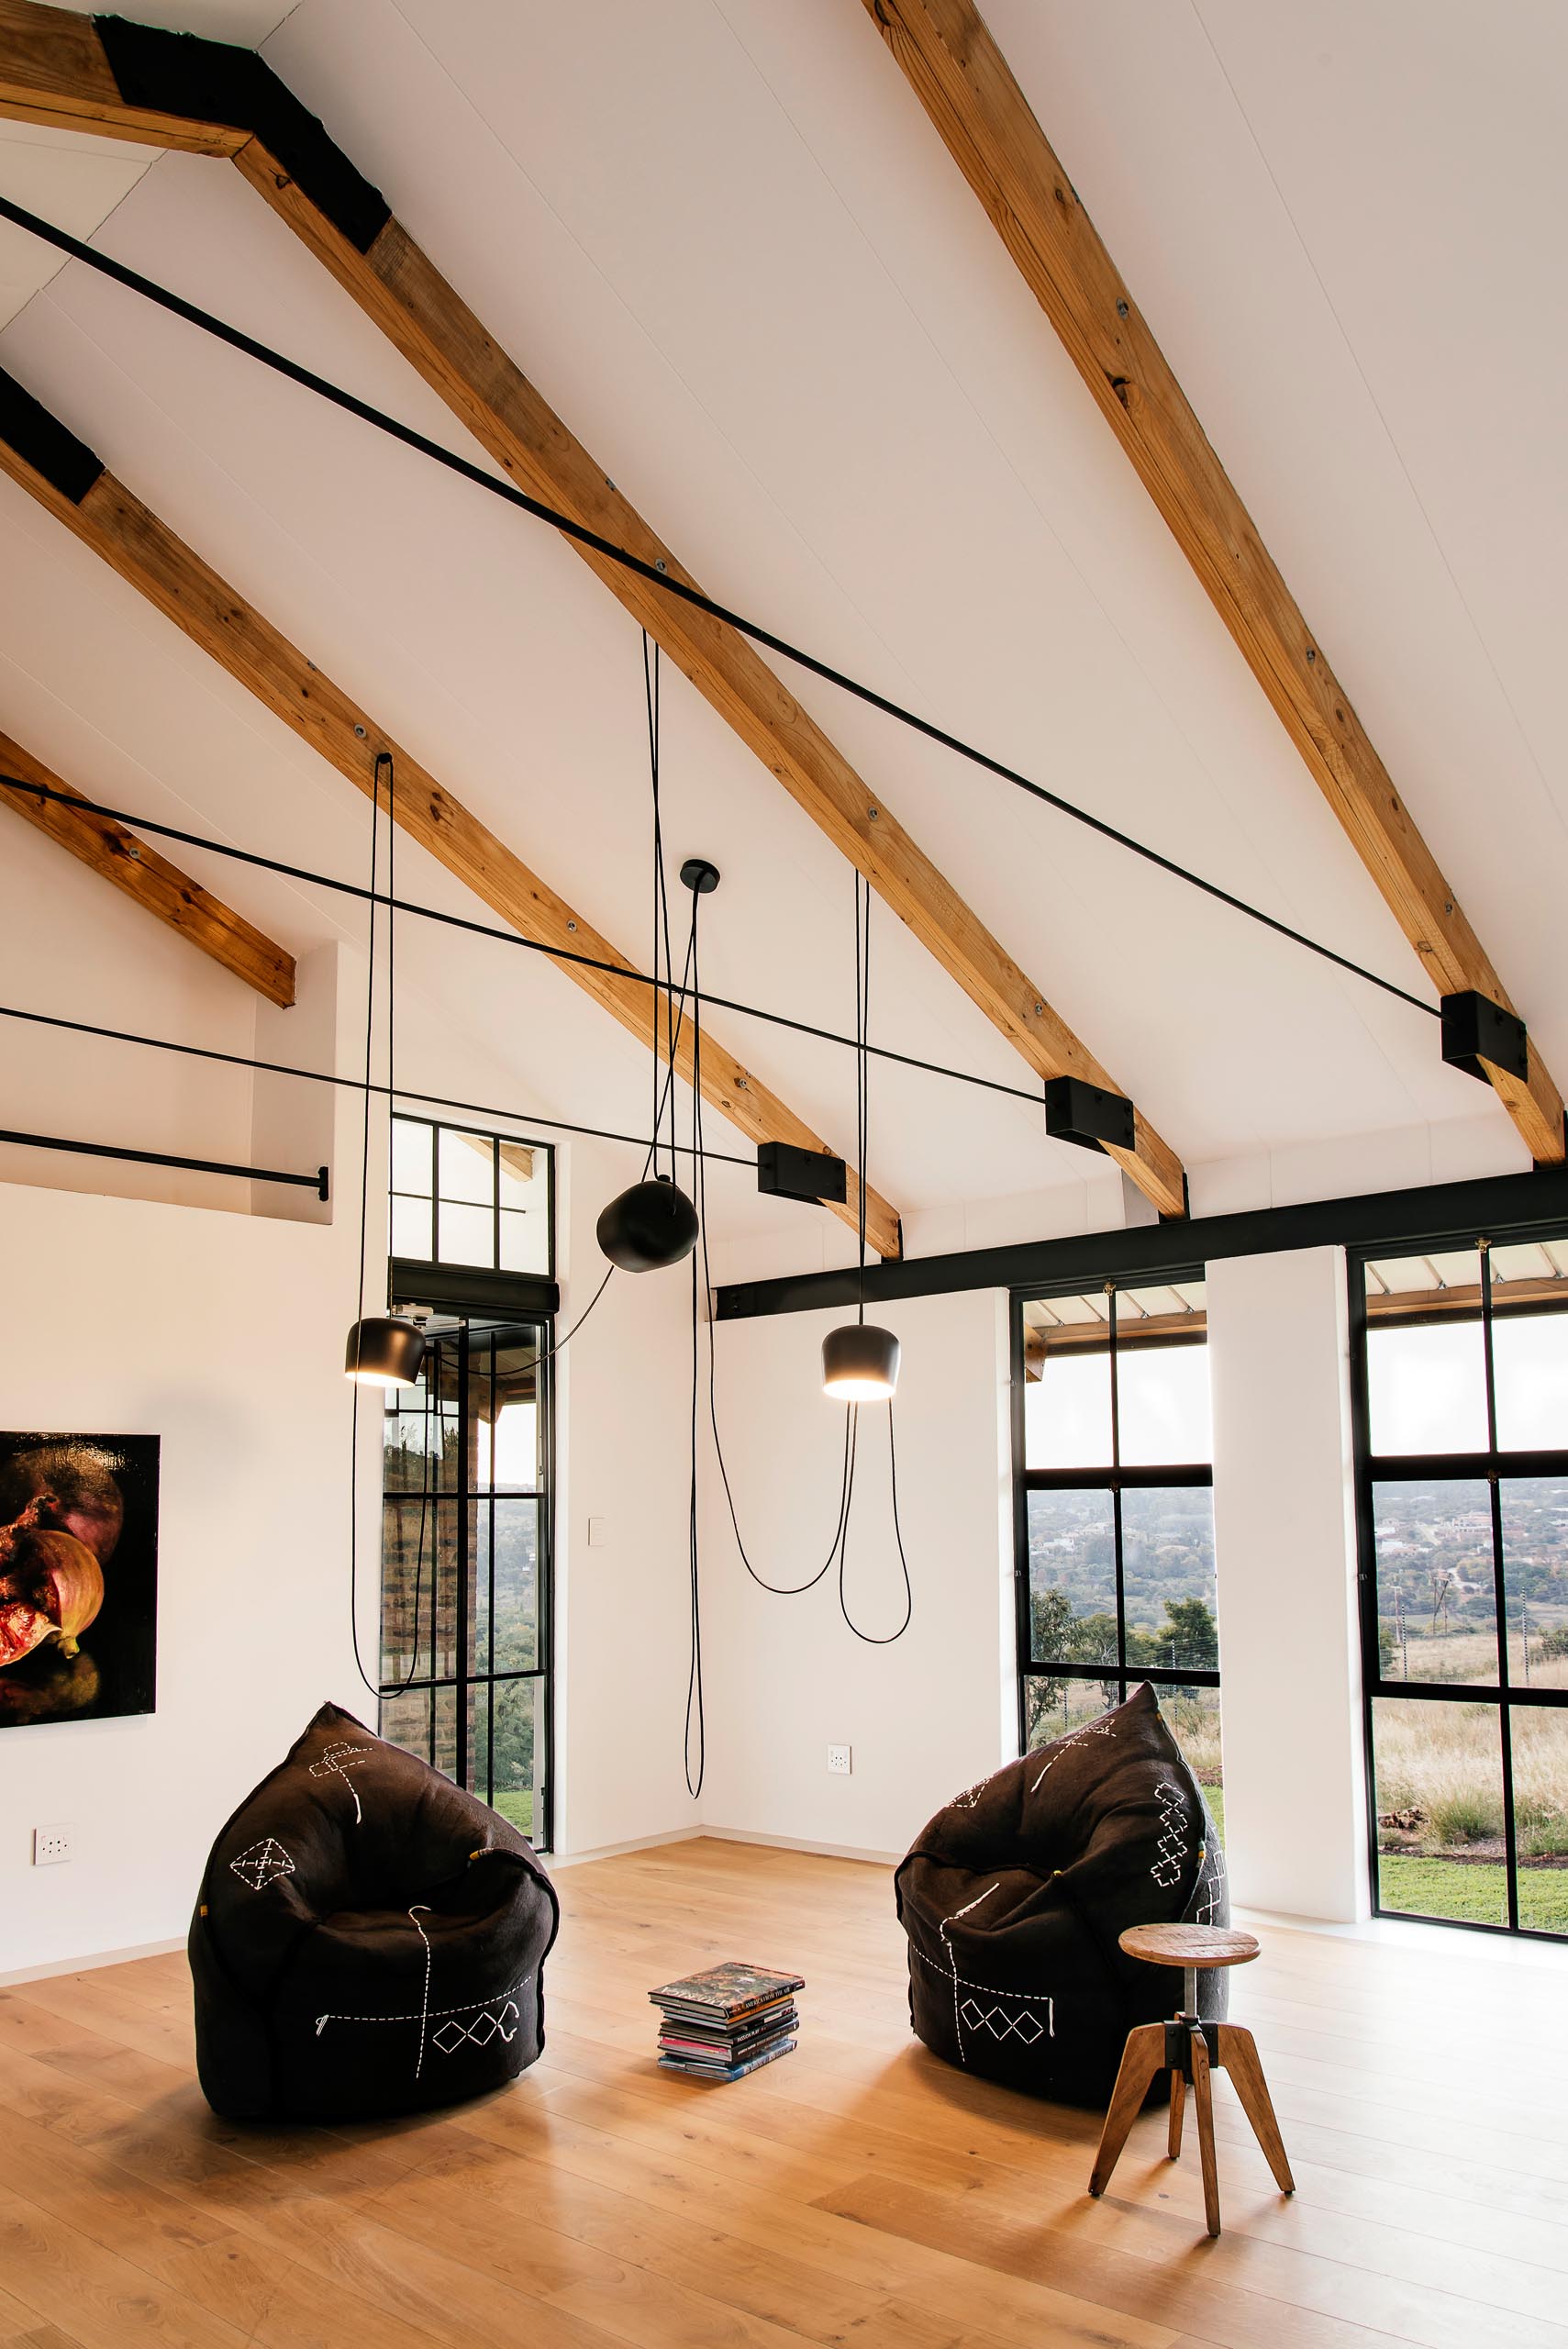 A modern home has a living space with exposed beams, wood flooring, and a pair of black felt chairs.